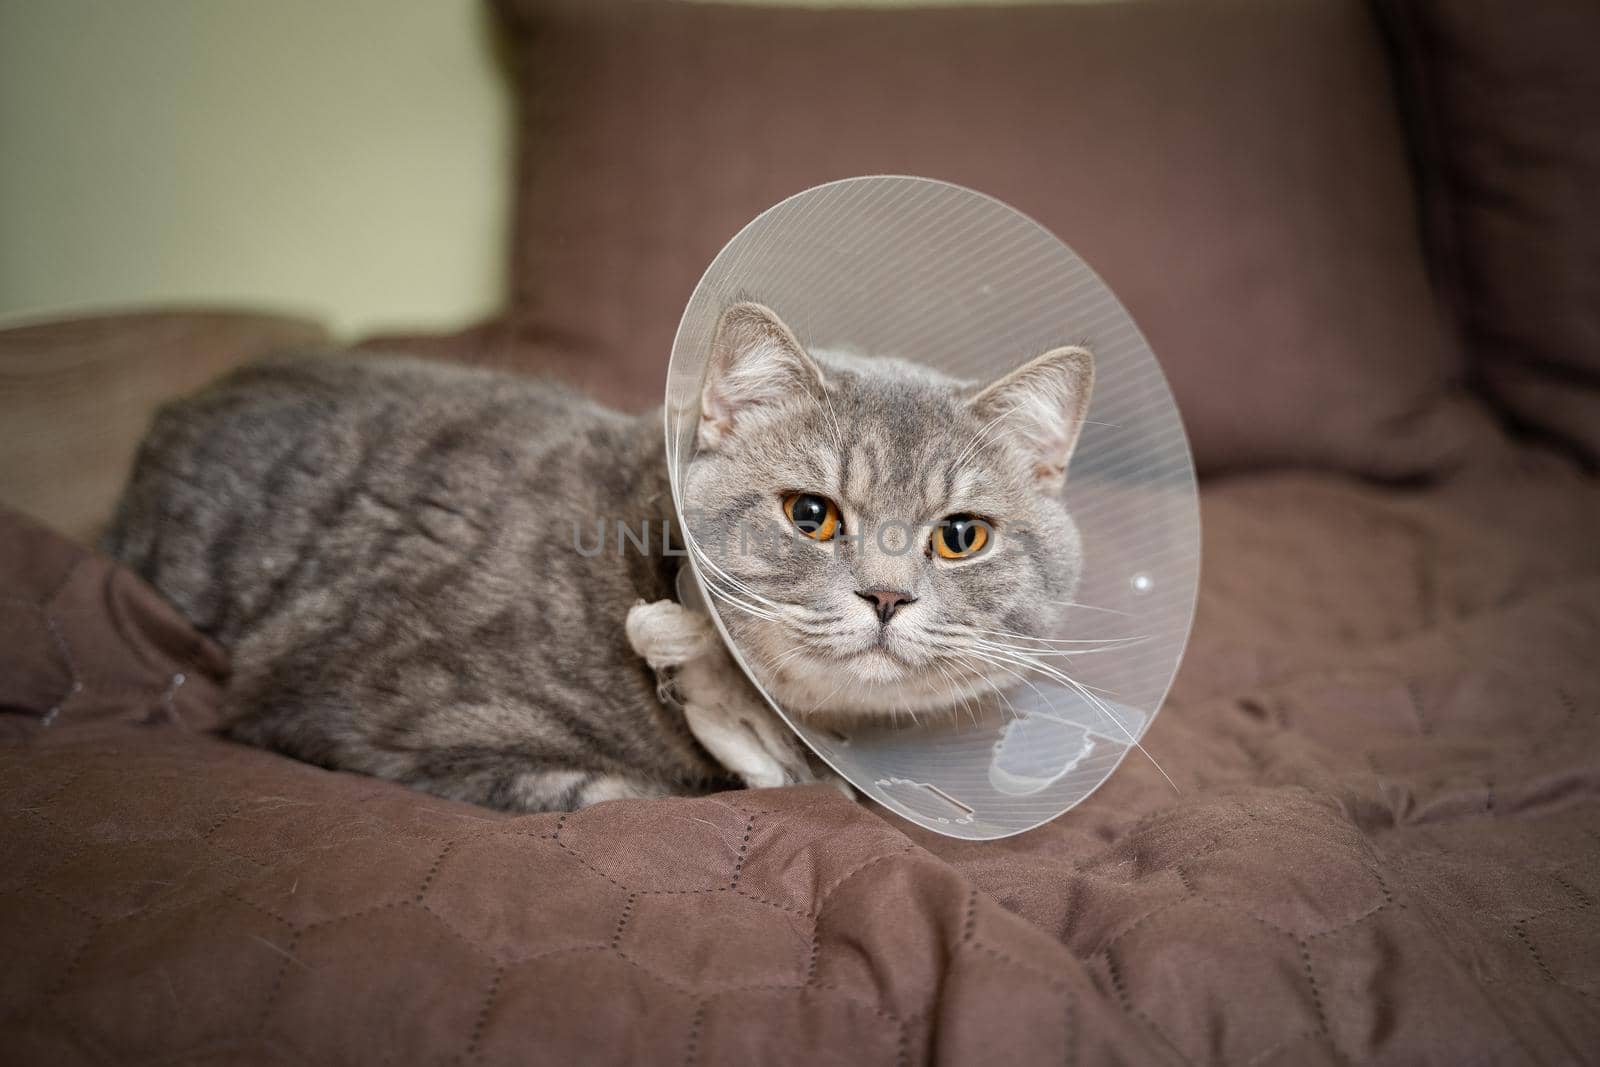 Sick gray Scottish Straight breed cat wearing pet medical collar cone Elizabethan collar to avoid licking at house. British cat after surgery at home on couch wearing protective plastic cone on head by Tomashevska